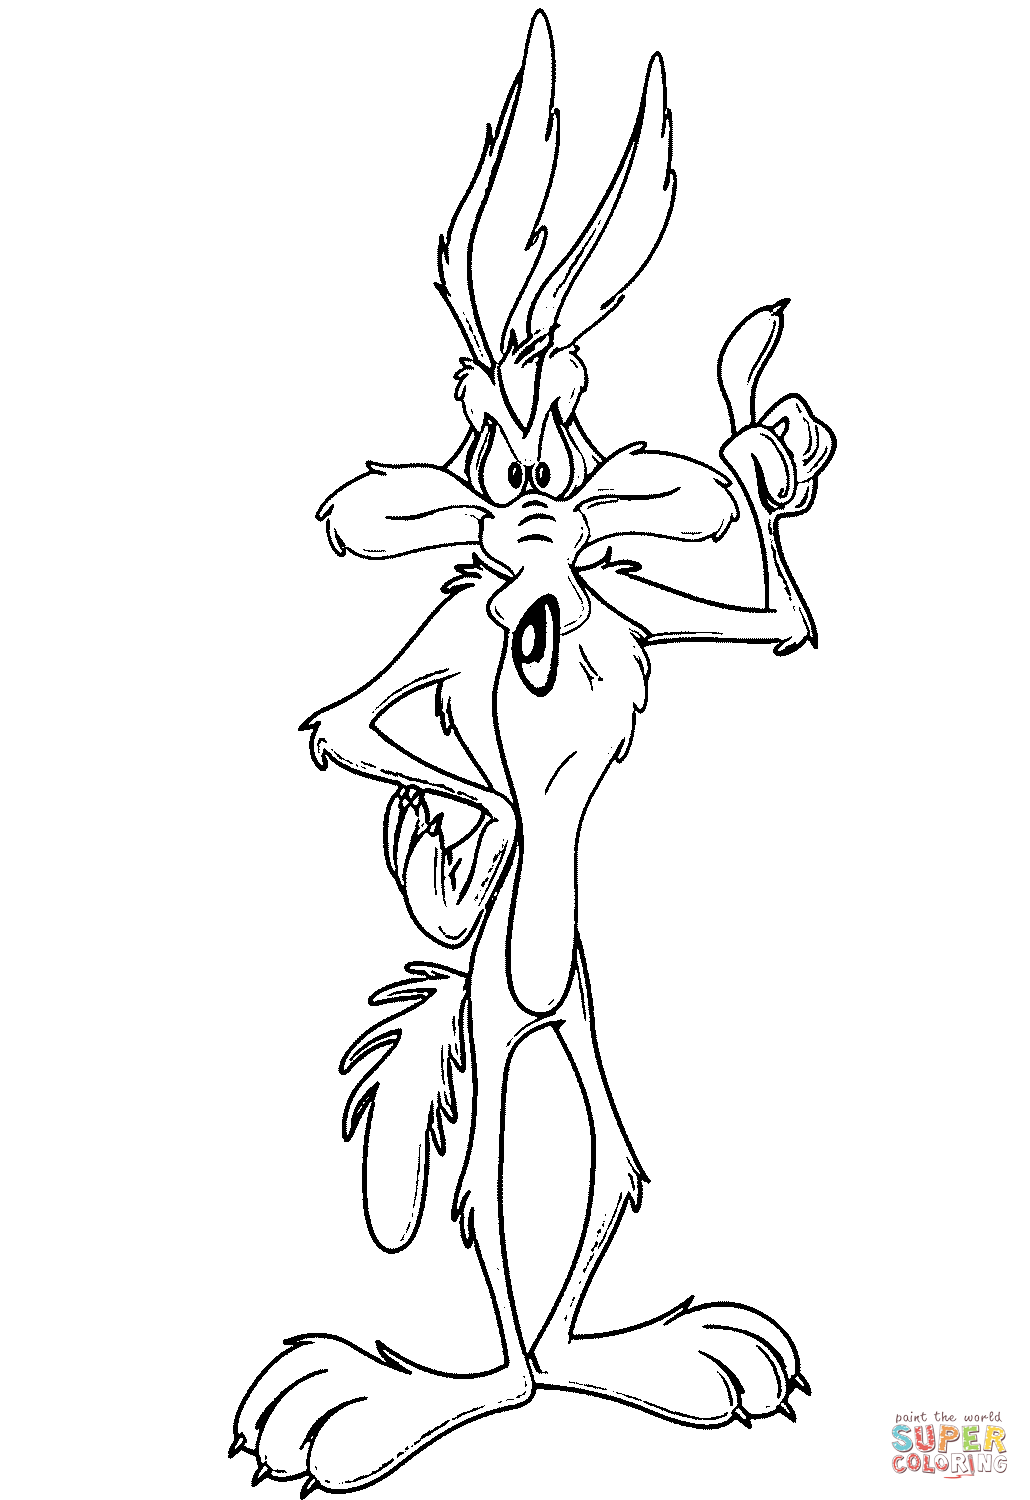 Wile E. Coyote coloring page | Free Printable Coloring Pages